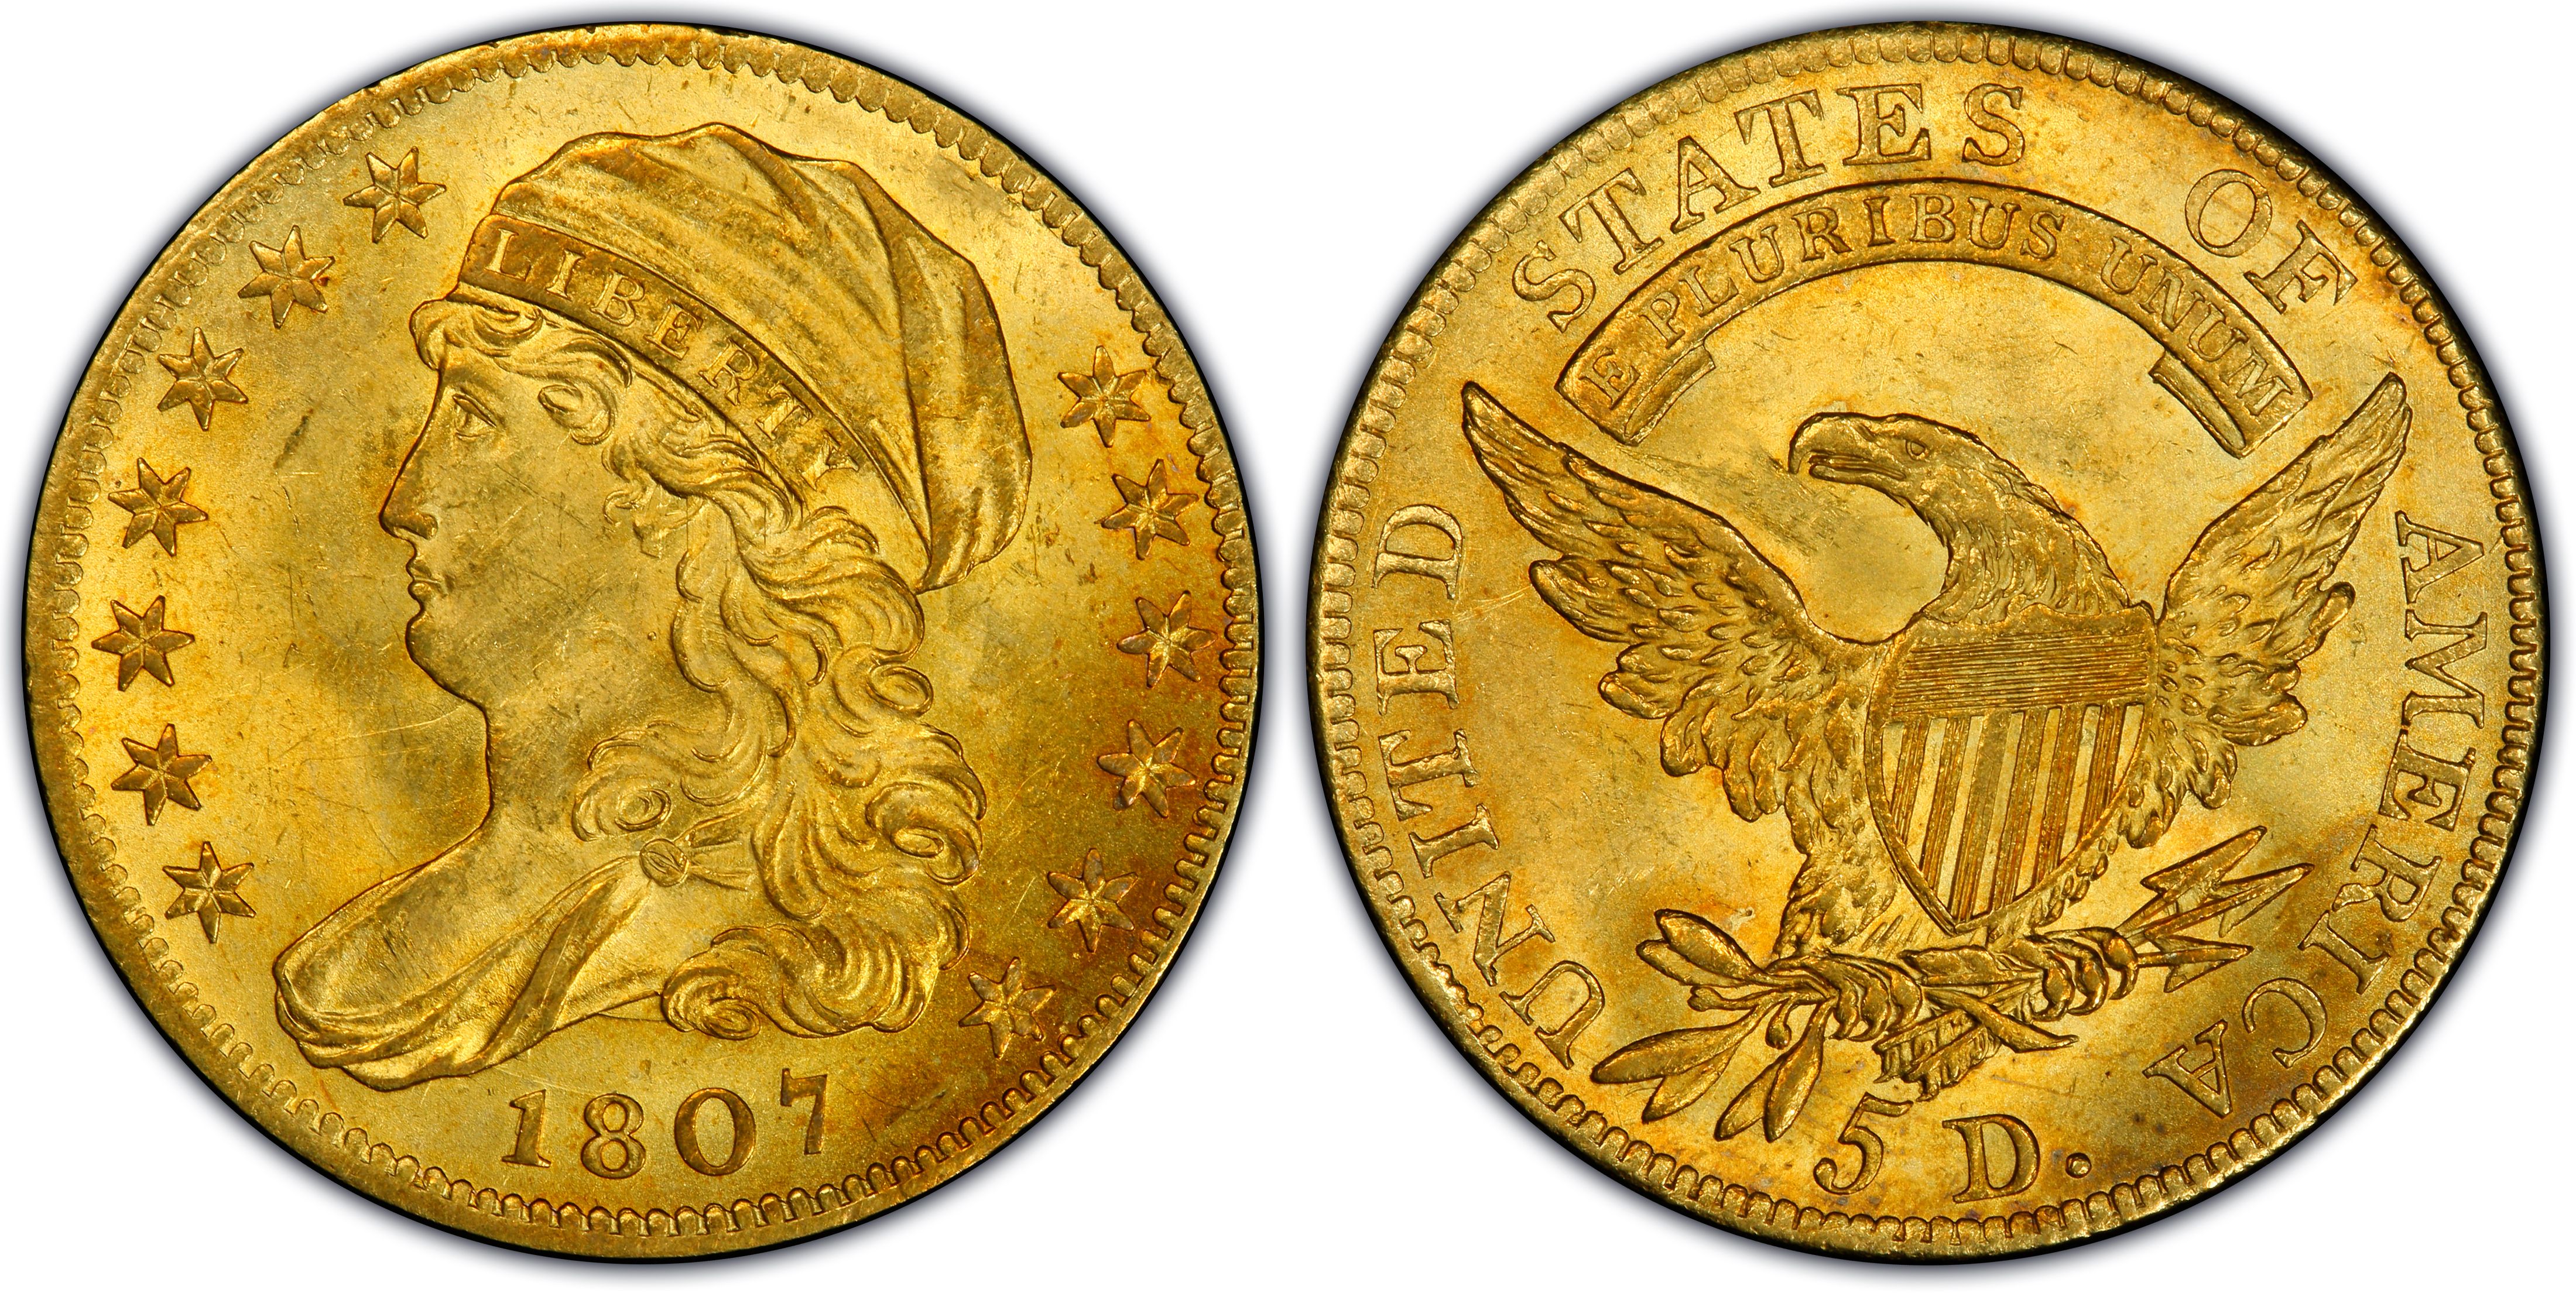 1807 $5 Capped Bust (Regular Strike) Capped Bust $5 - PCGS CoinFacts